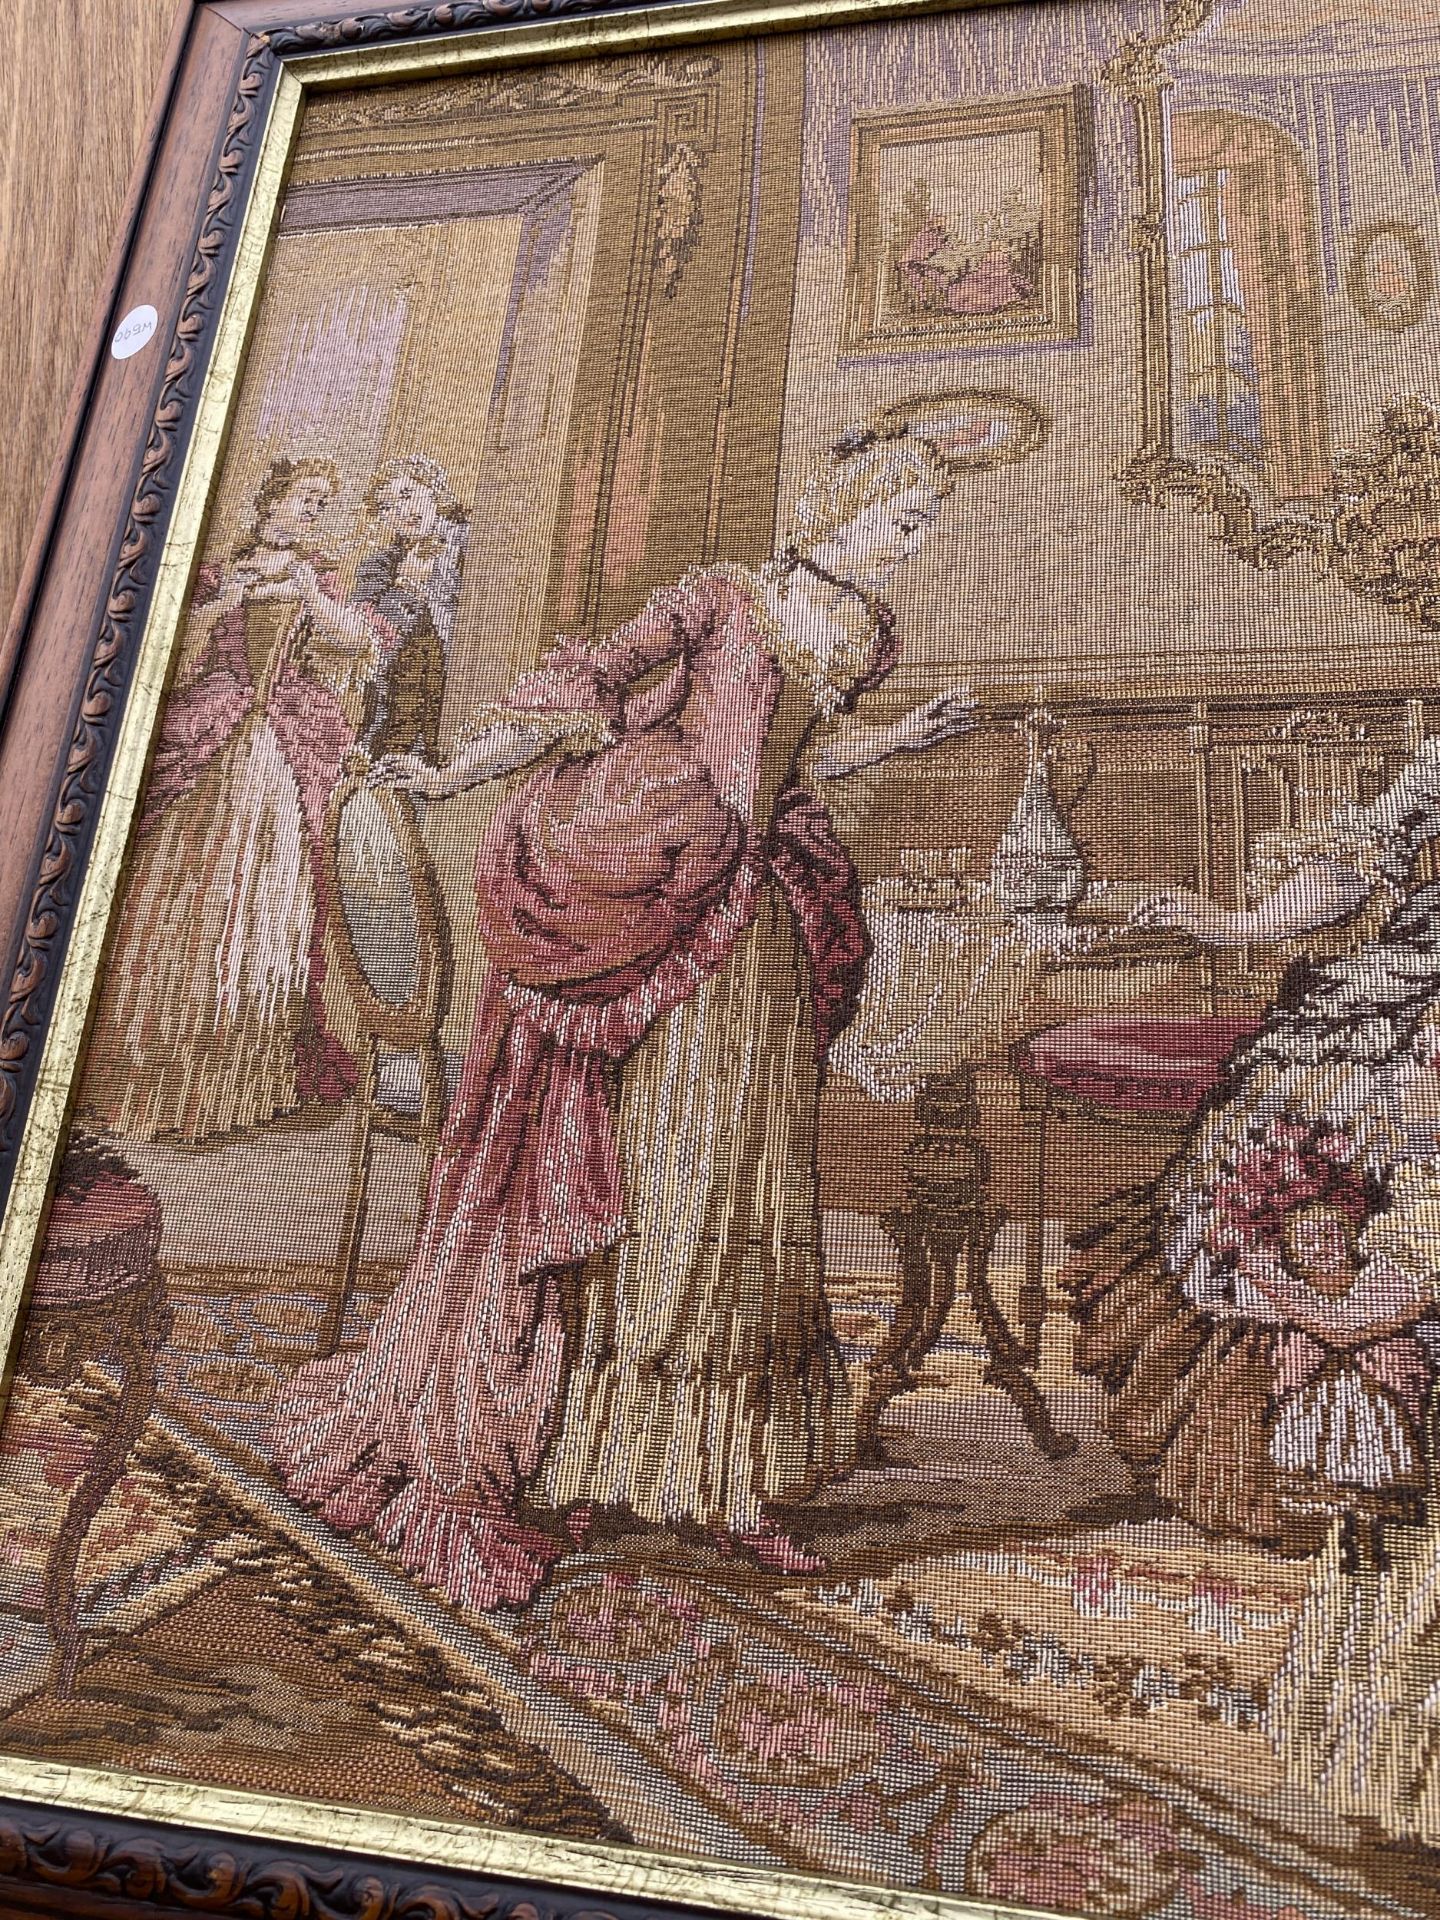 A FRAMED TAPESTRY OF A MANOR HOUSE SCENE - Image 3 of 4